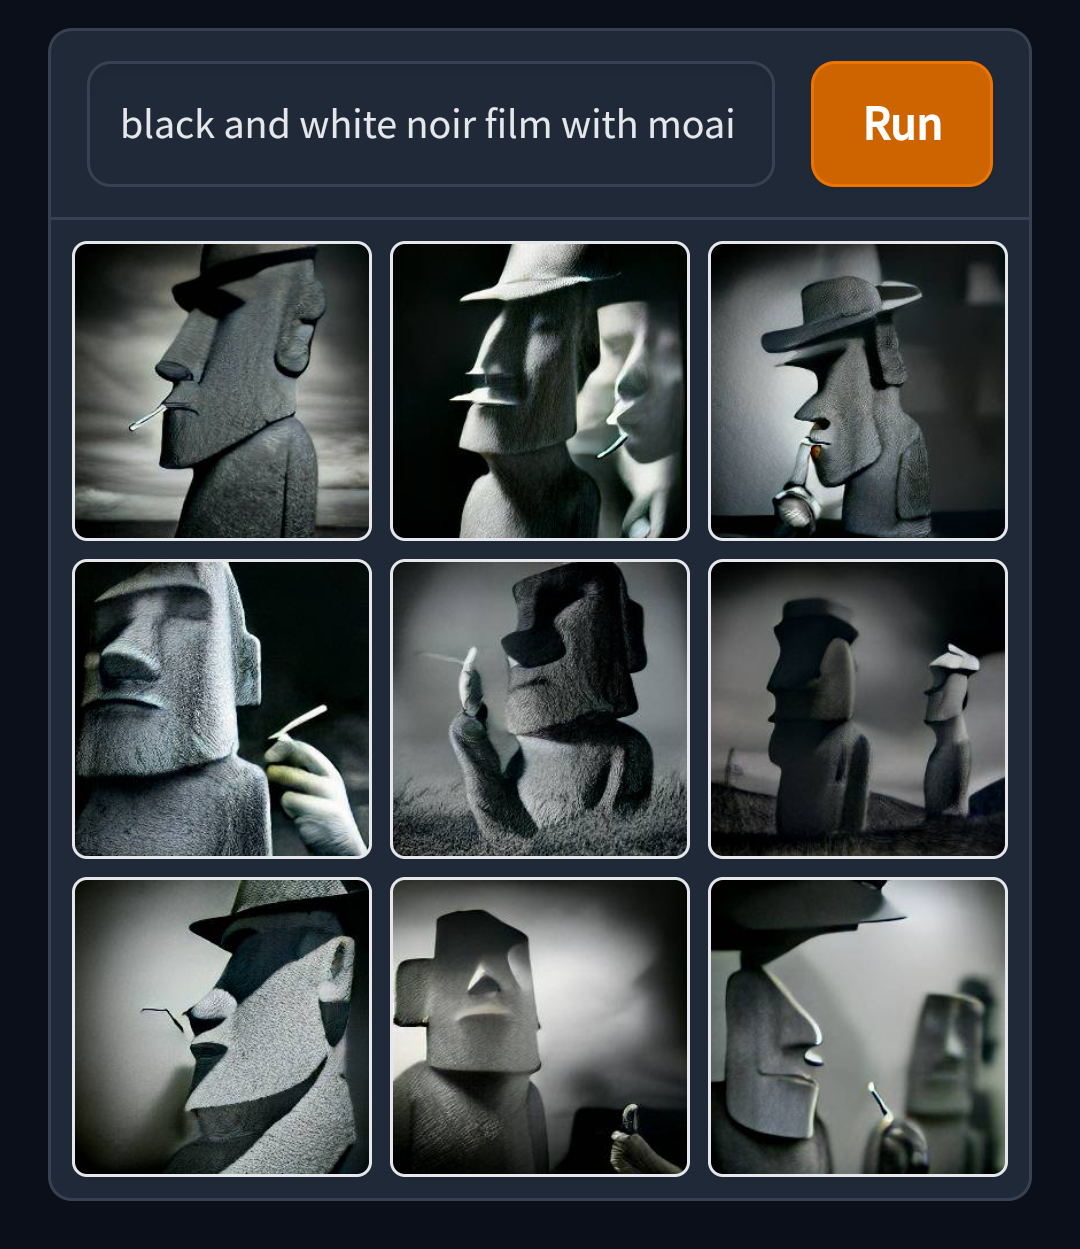 A screenshot of dalle-mini, showing a grid of 9 images generated from the prompt 'Black and white noir film with moai statue detective smoking a cigarette'.